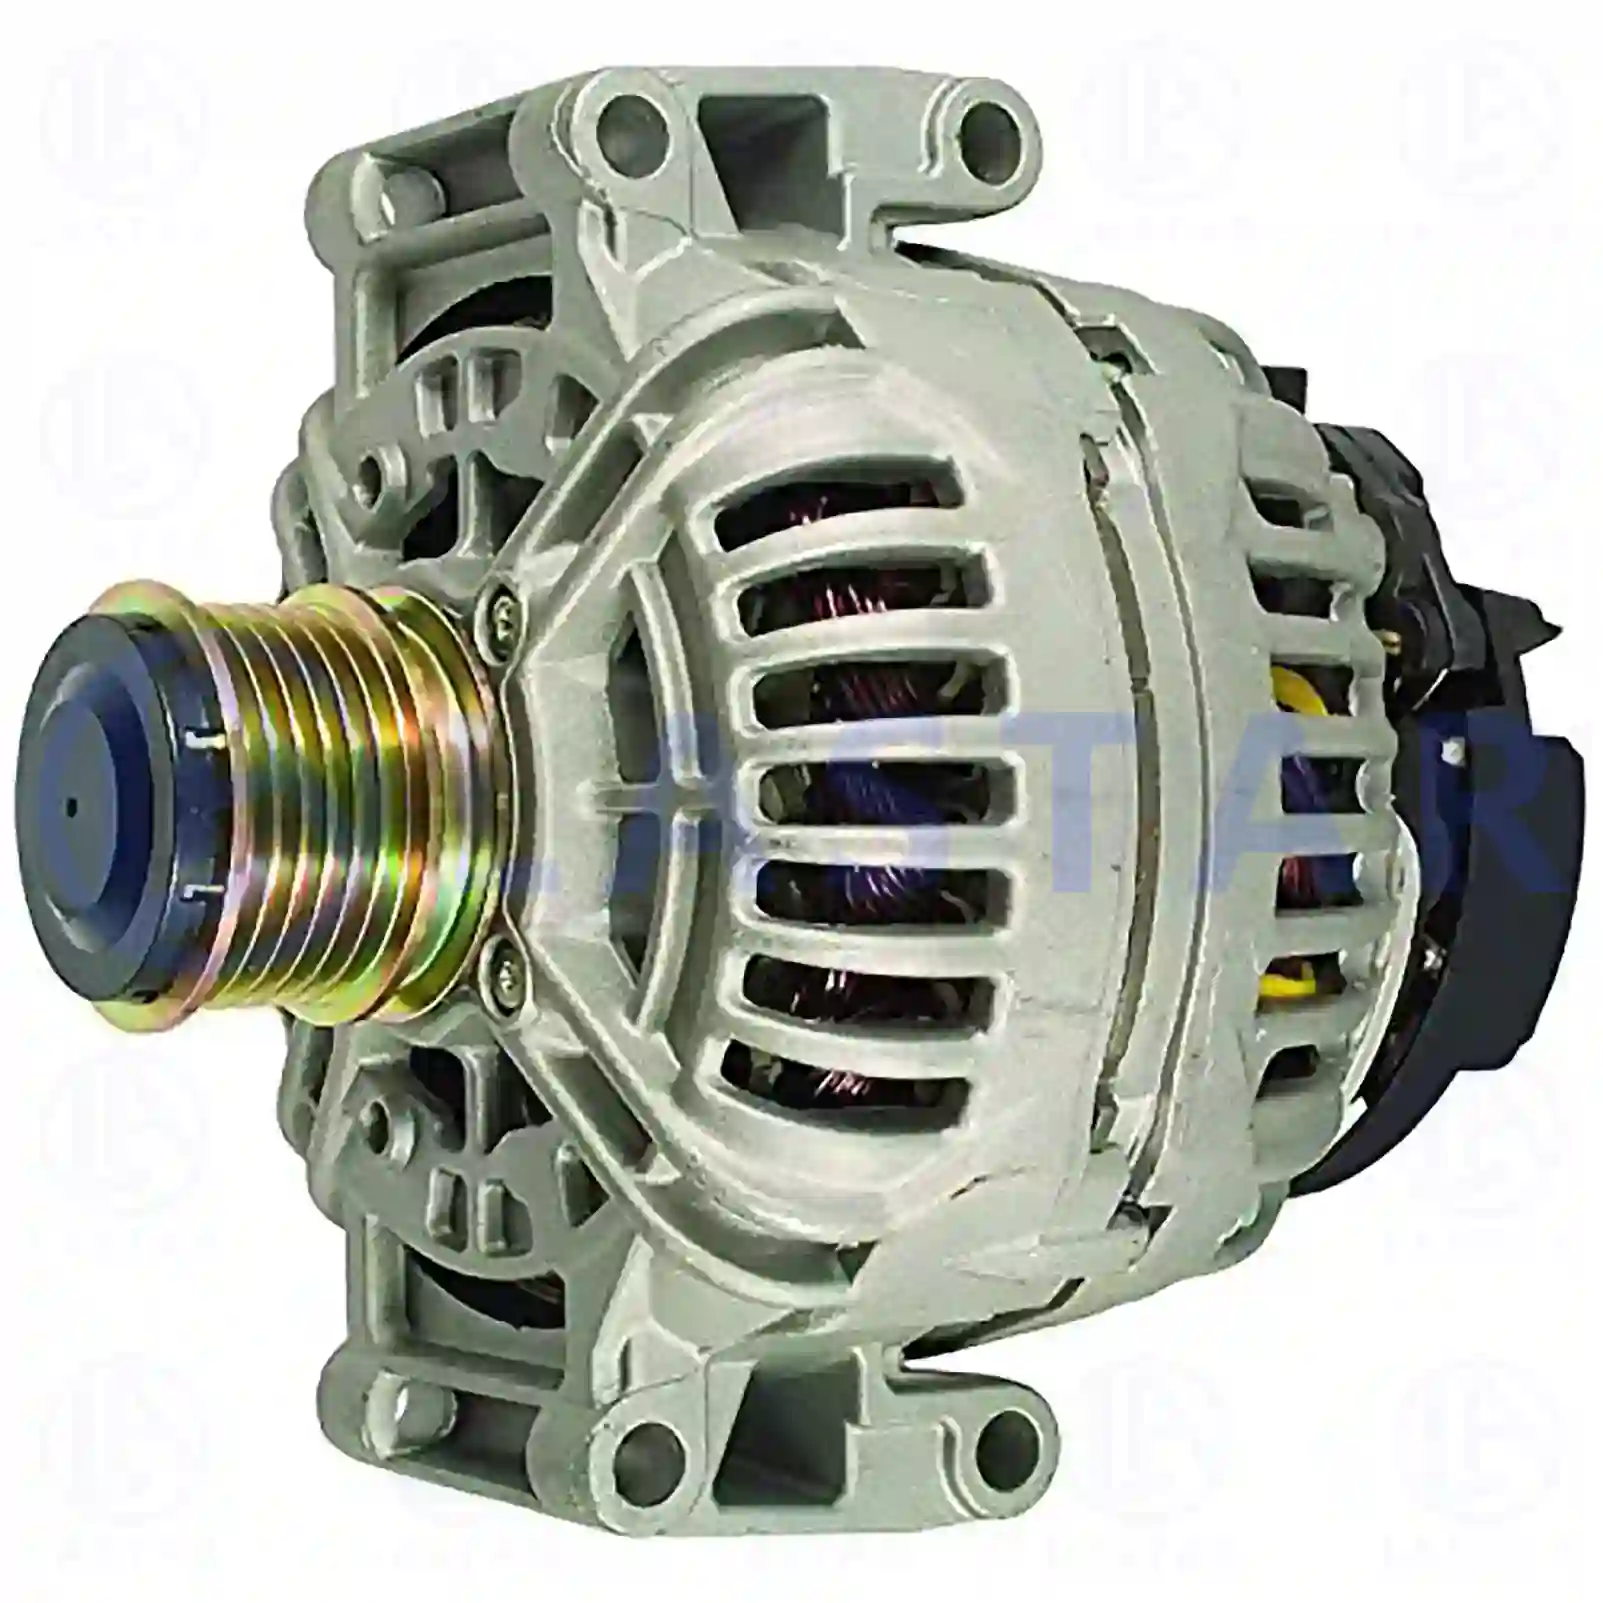 Alternator, without pulley, 77711592, 5103886AA, 5134204AA, 5134204AB, 0101545902, 0101549602, 0111540902, 0121542402, 0121545402, 0131541502, 0101545902, 0101549602, 0121545402 ||  77711592 Lastar Spare Part | Truck Spare Parts, Auotomotive Spare Parts Alternator, without pulley, 77711592, 5103886AA, 5134204AA, 5134204AB, 0101545902, 0101549602, 0111540902, 0121542402, 0121545402, 0131541502, 0101545902, 0101549602, 0121545402 ||  77711592 Lastar Spare Part | Truck Spare Parts, Auotomotive Spare Parts